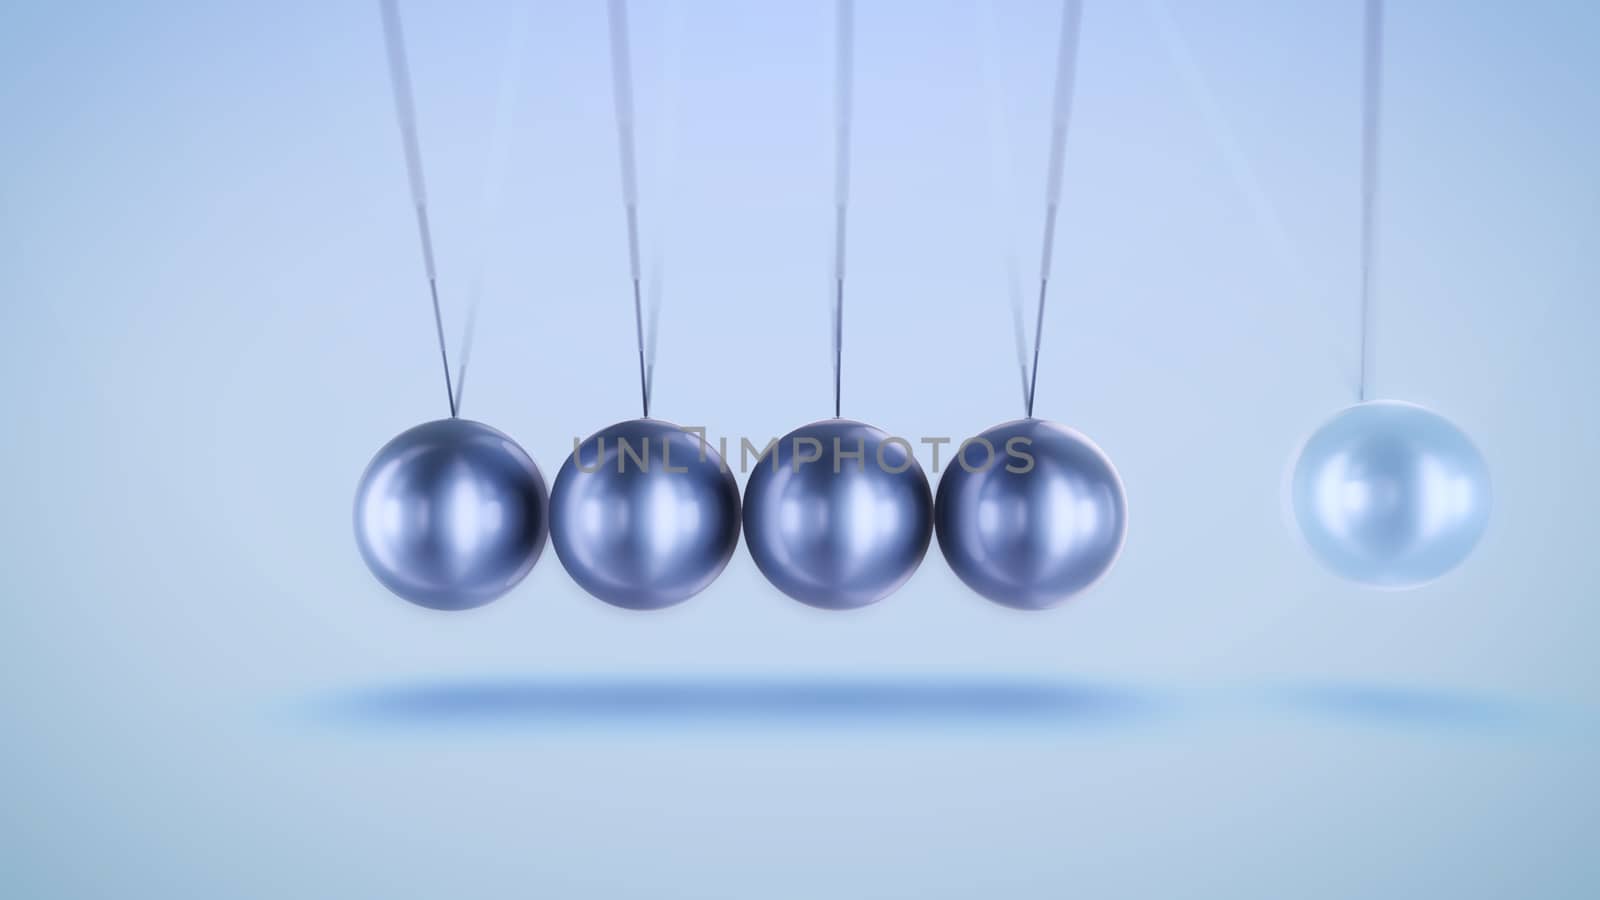 An impeccable 3d illustration of silver balls pendulum with swaying horizontally beads hitting each other in a light blue backdrop with blurred dots. They look technological, eternal and exact.